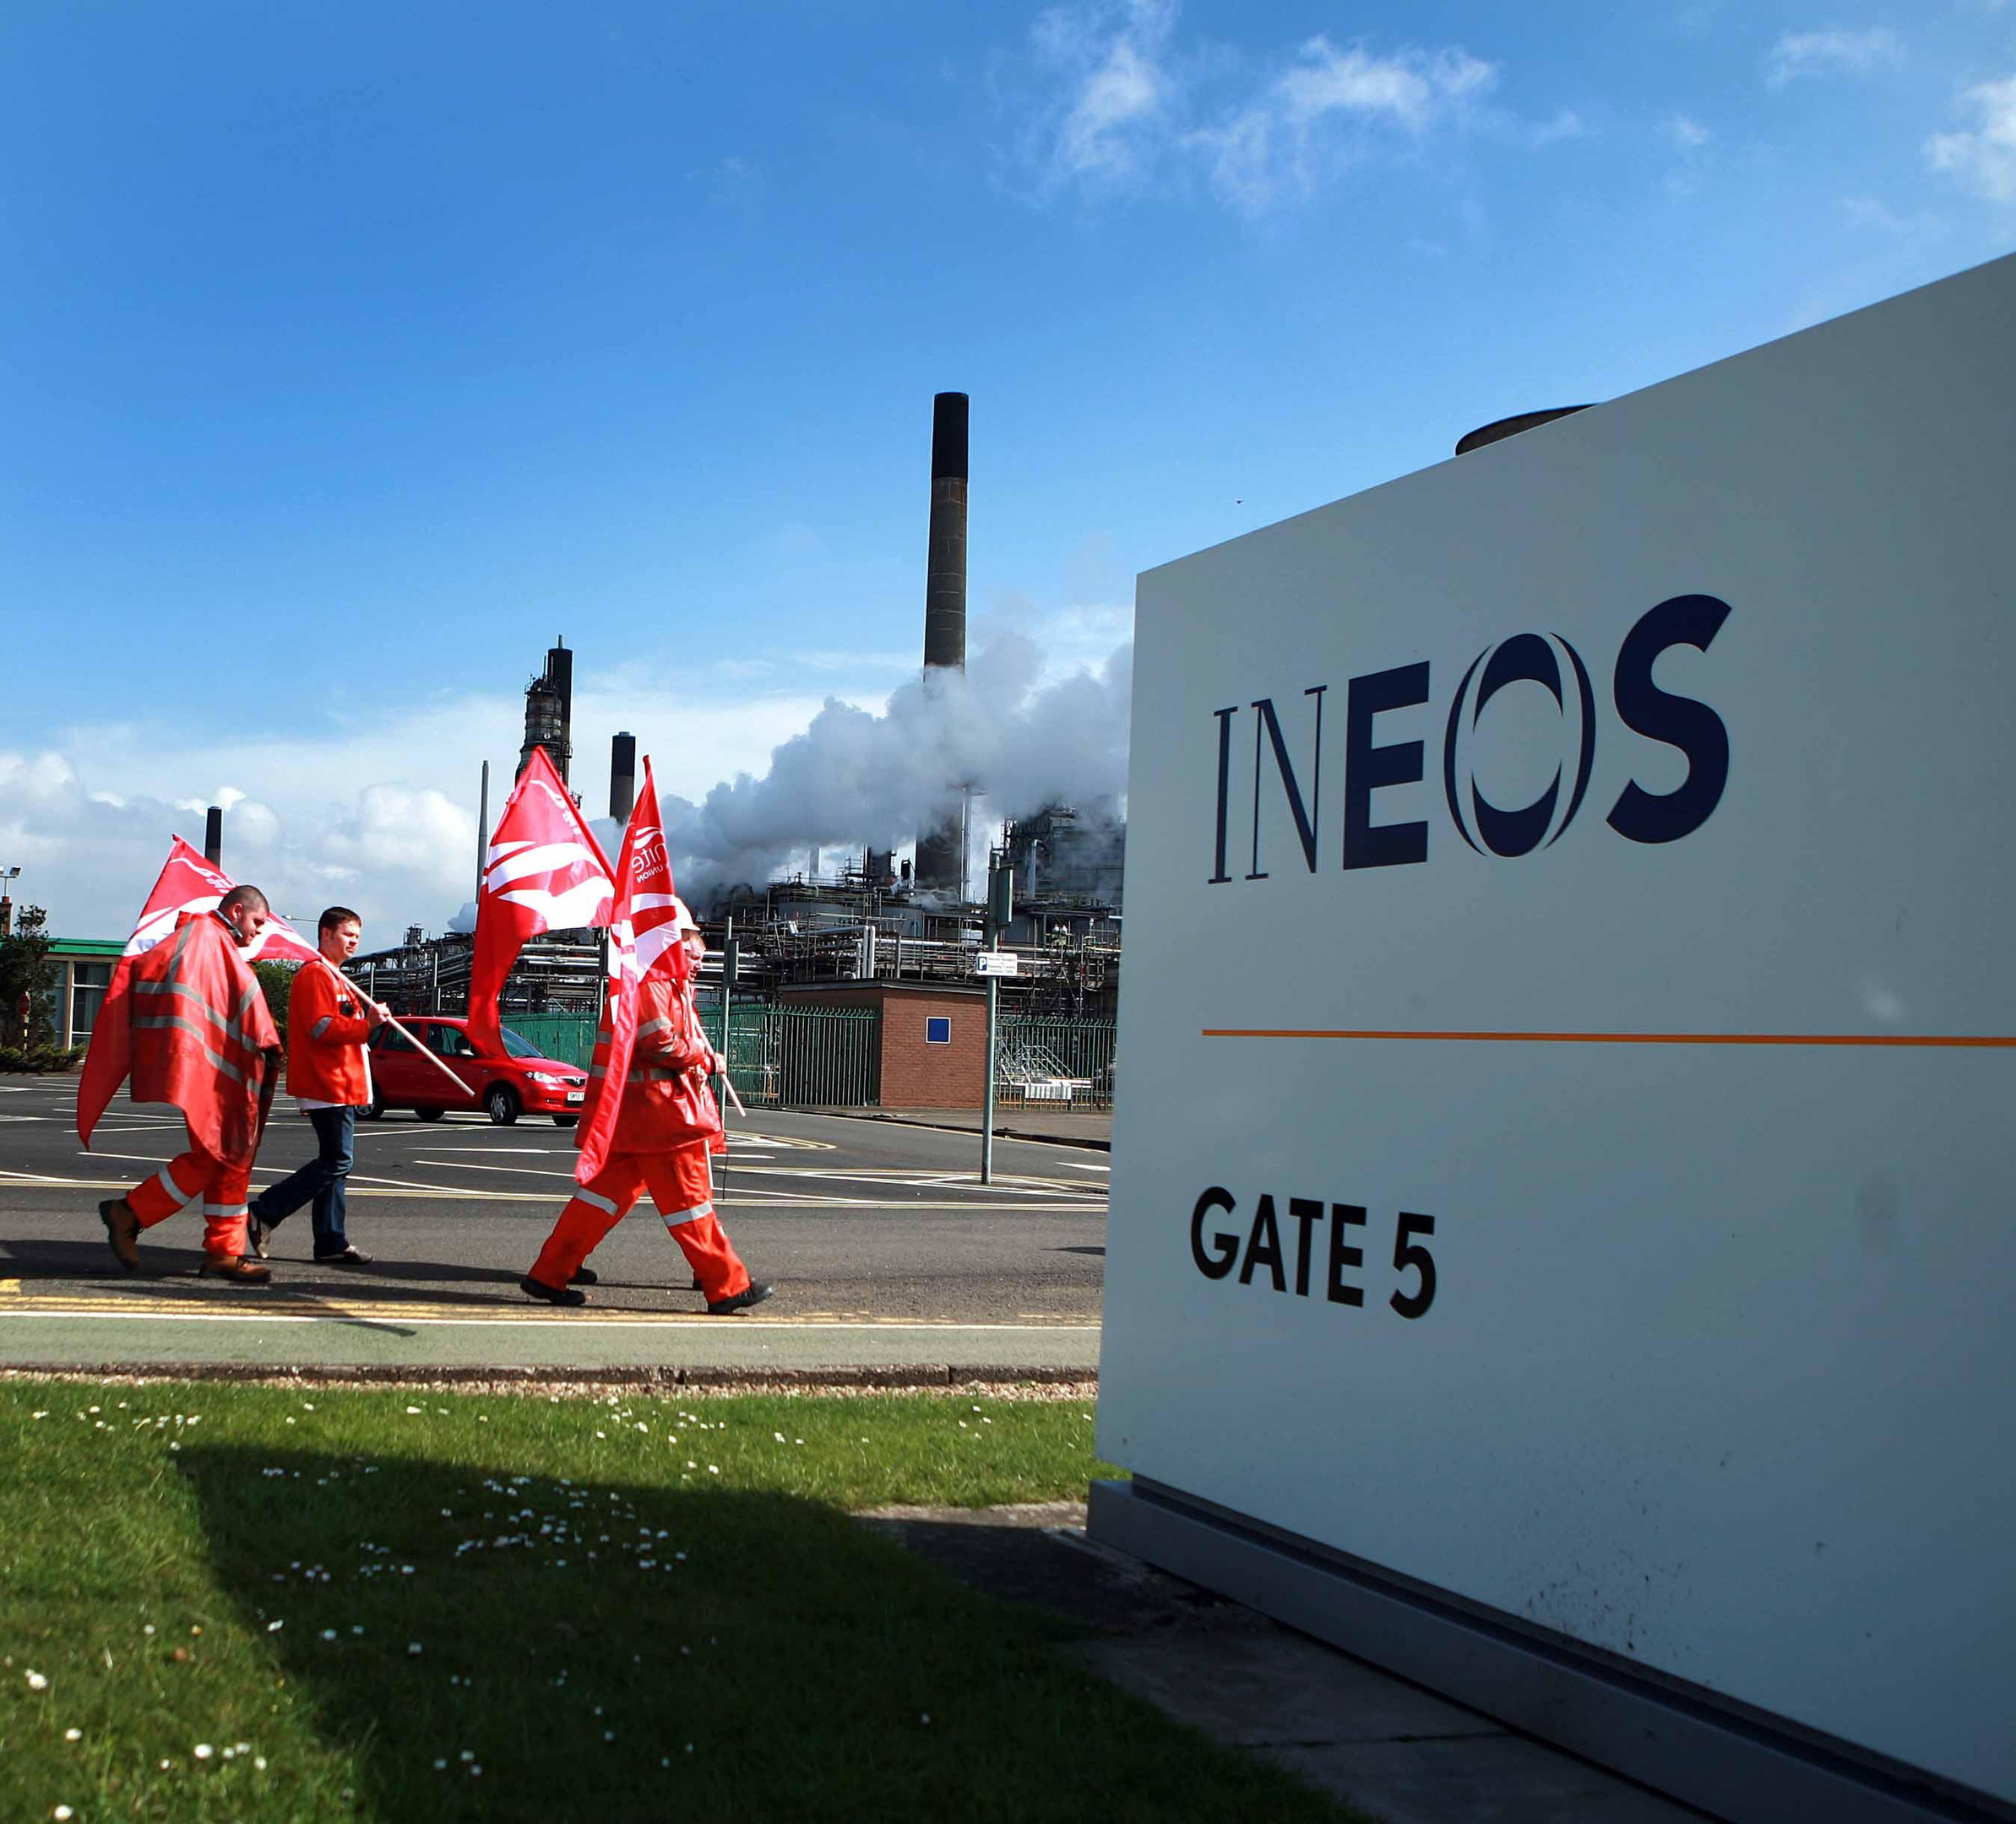 Flag waving Unite supporters outside Ineos Grangemouth during the 2013 dispute